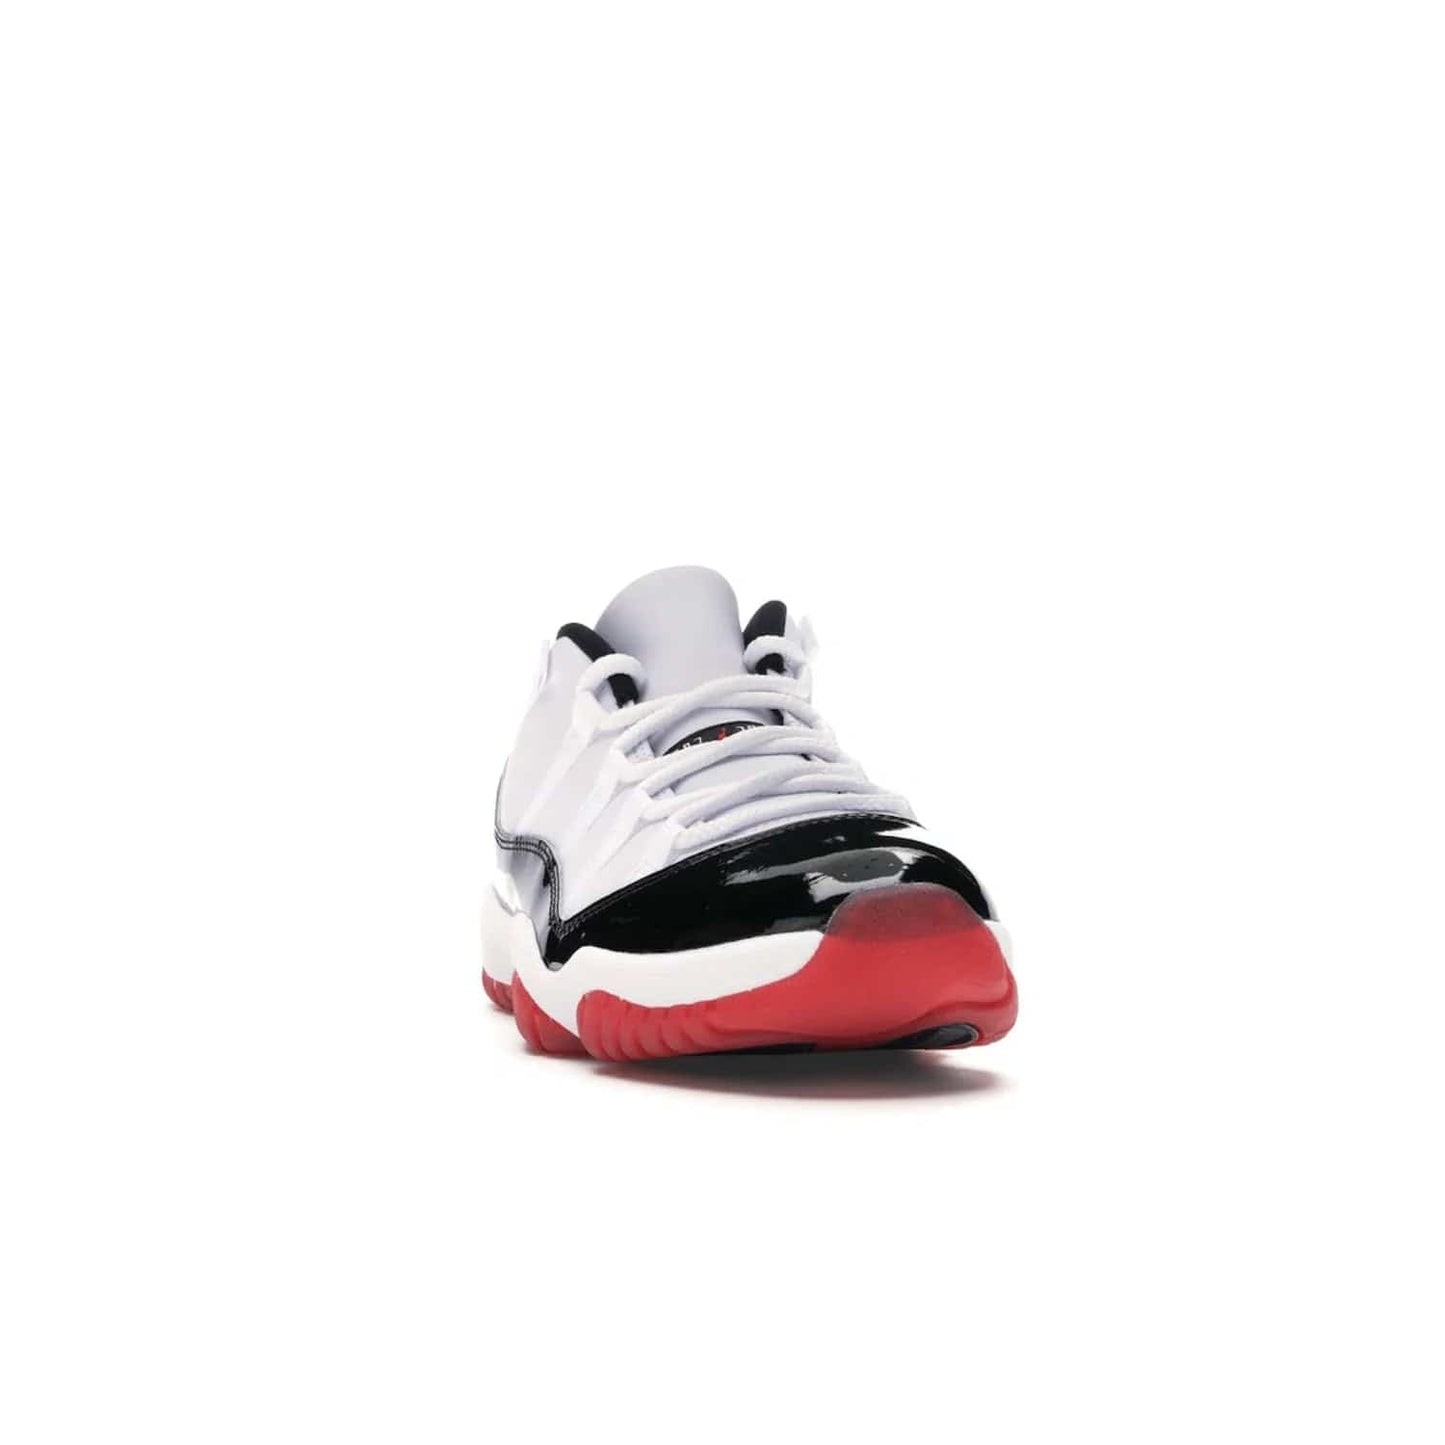 Jordan 11 Retro Low Concord Bred - Image 8 - Only at www.BallersClubKickz.com - Grab the classic Jordan 11 look with the Jordan 11 Retro Low Concord Bred. With white and black elements and the iconic red outsole of the Jordan 11 Bred, you won't miss a beat. Released in June 2020, the perfect complement to any outfit.